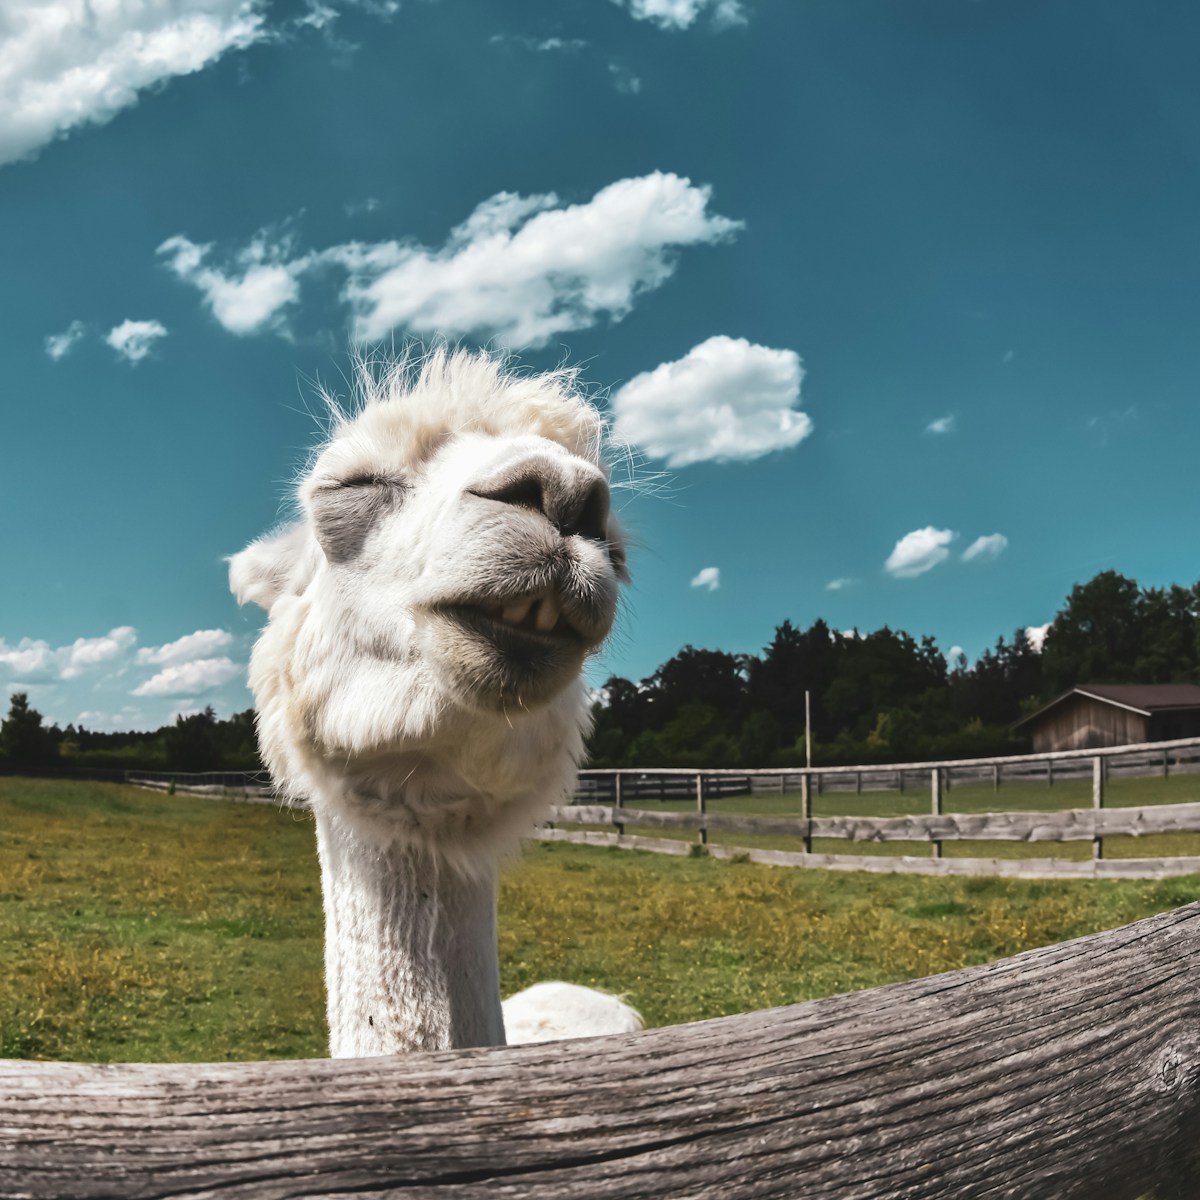 white camel on green grass field under blue sky during daytime